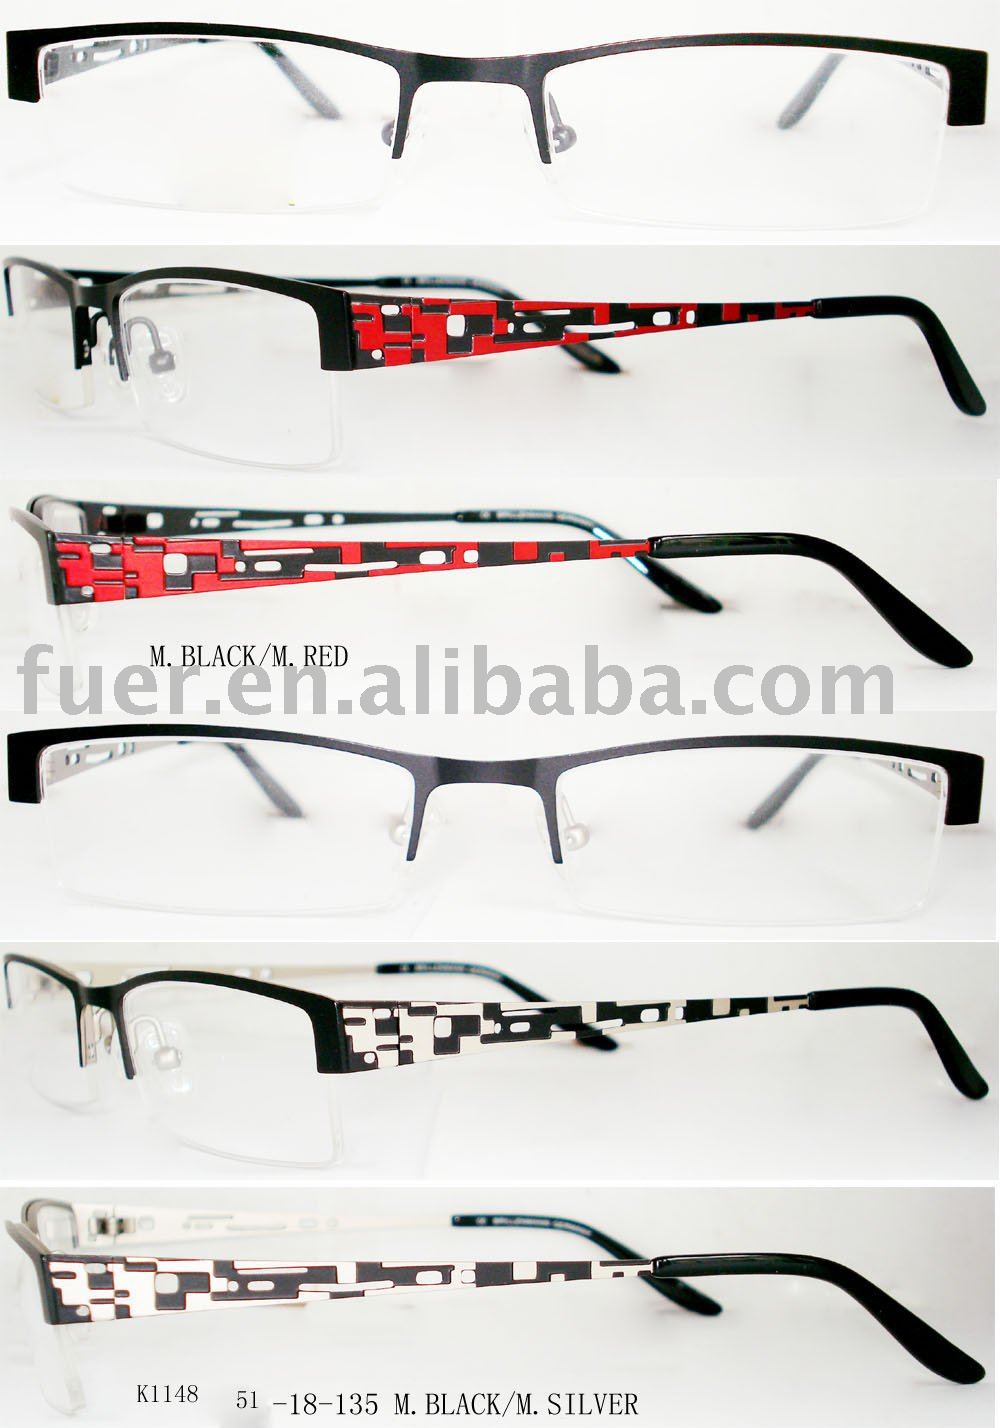 Frames Of Spectacles